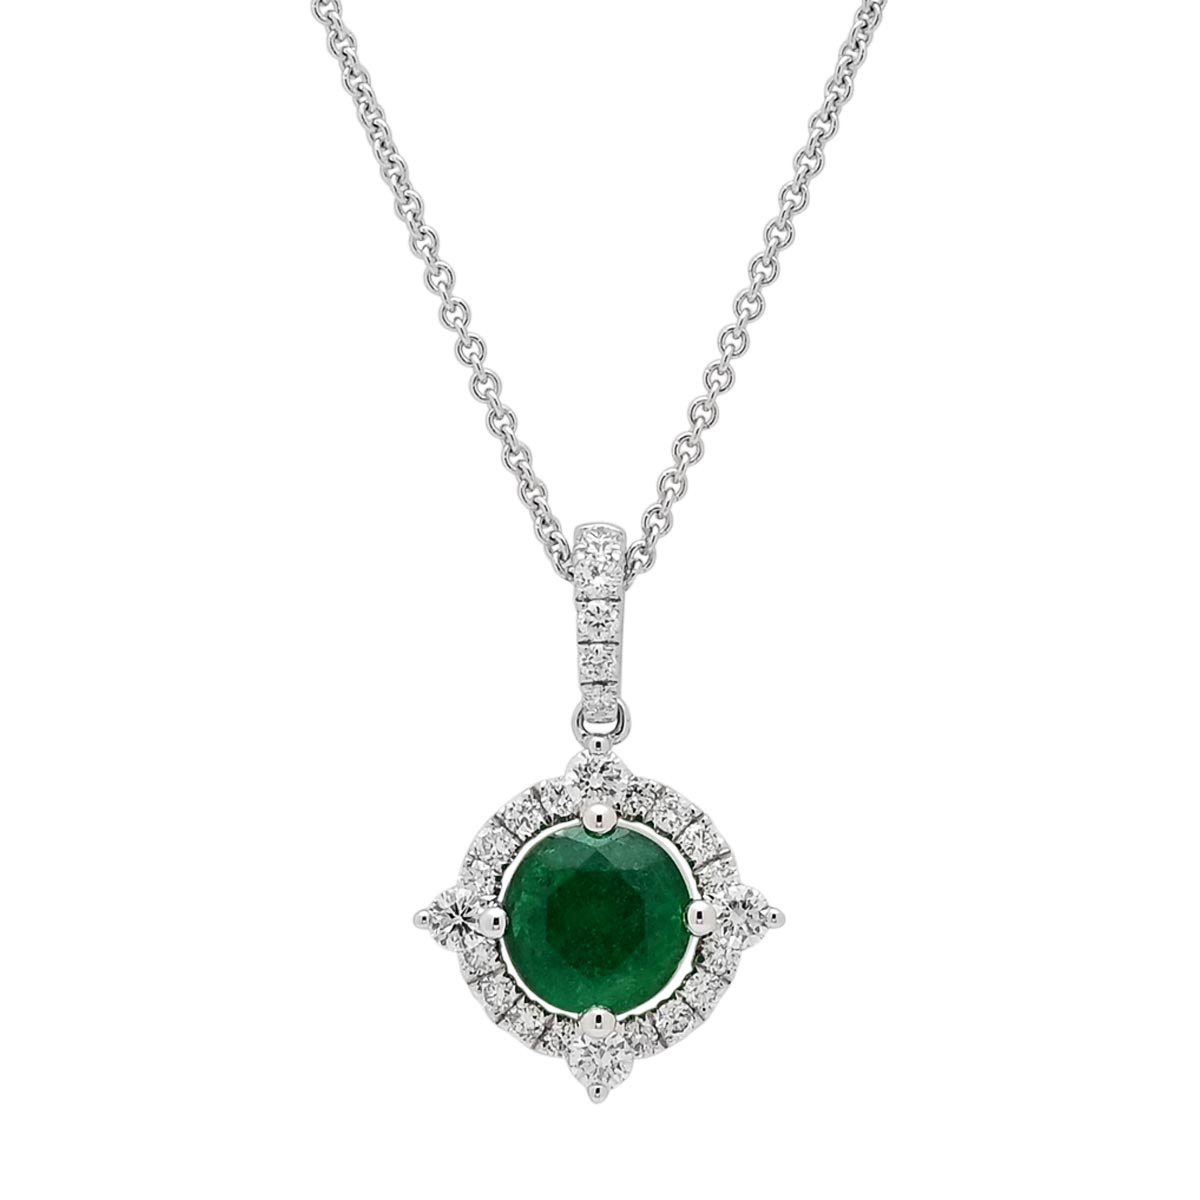 Emerald Necklace in 14kt White Gold with Diamonds (1/4ct tw)